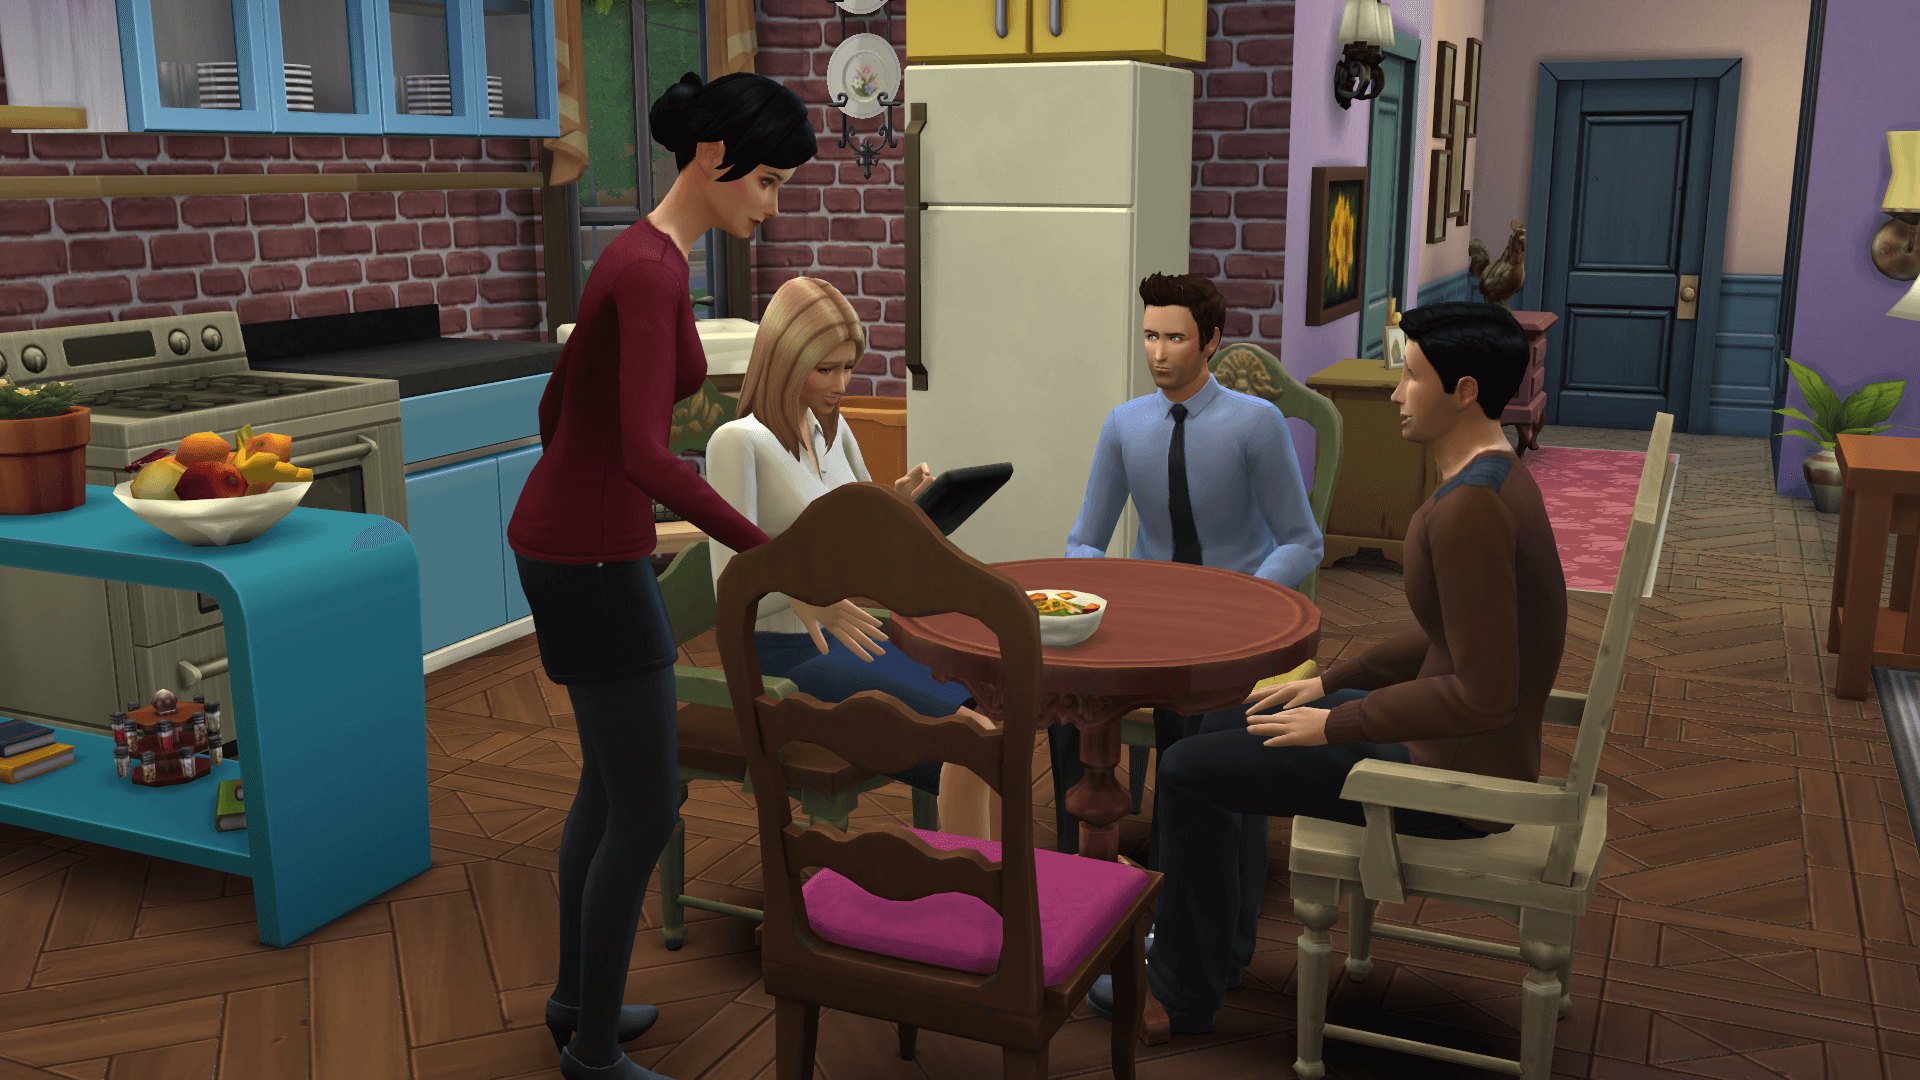 Wicked Whims Sims 4 Update